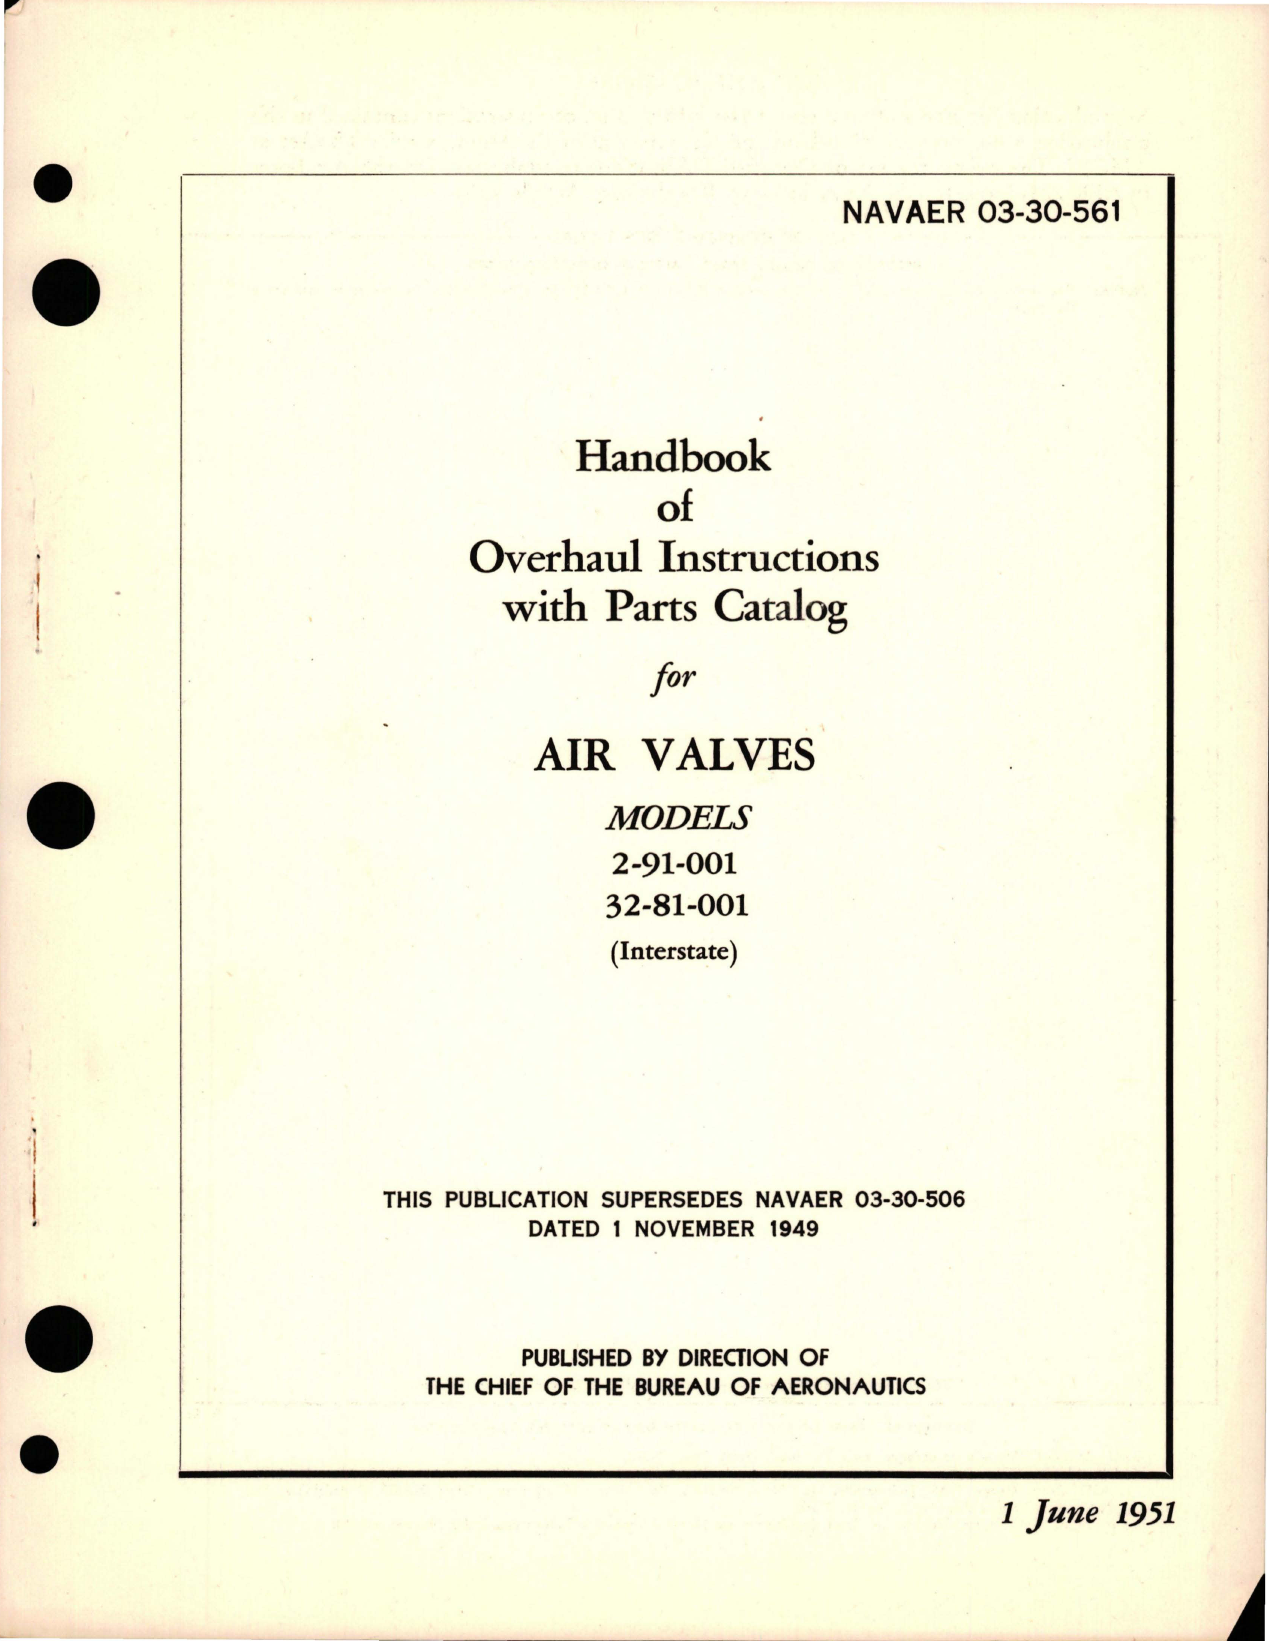 Sample page 1 from AirCorps Library document: Overhaul Instructions with Parts Catalog for Air Valves - Models 2-91-001, 32-81-001